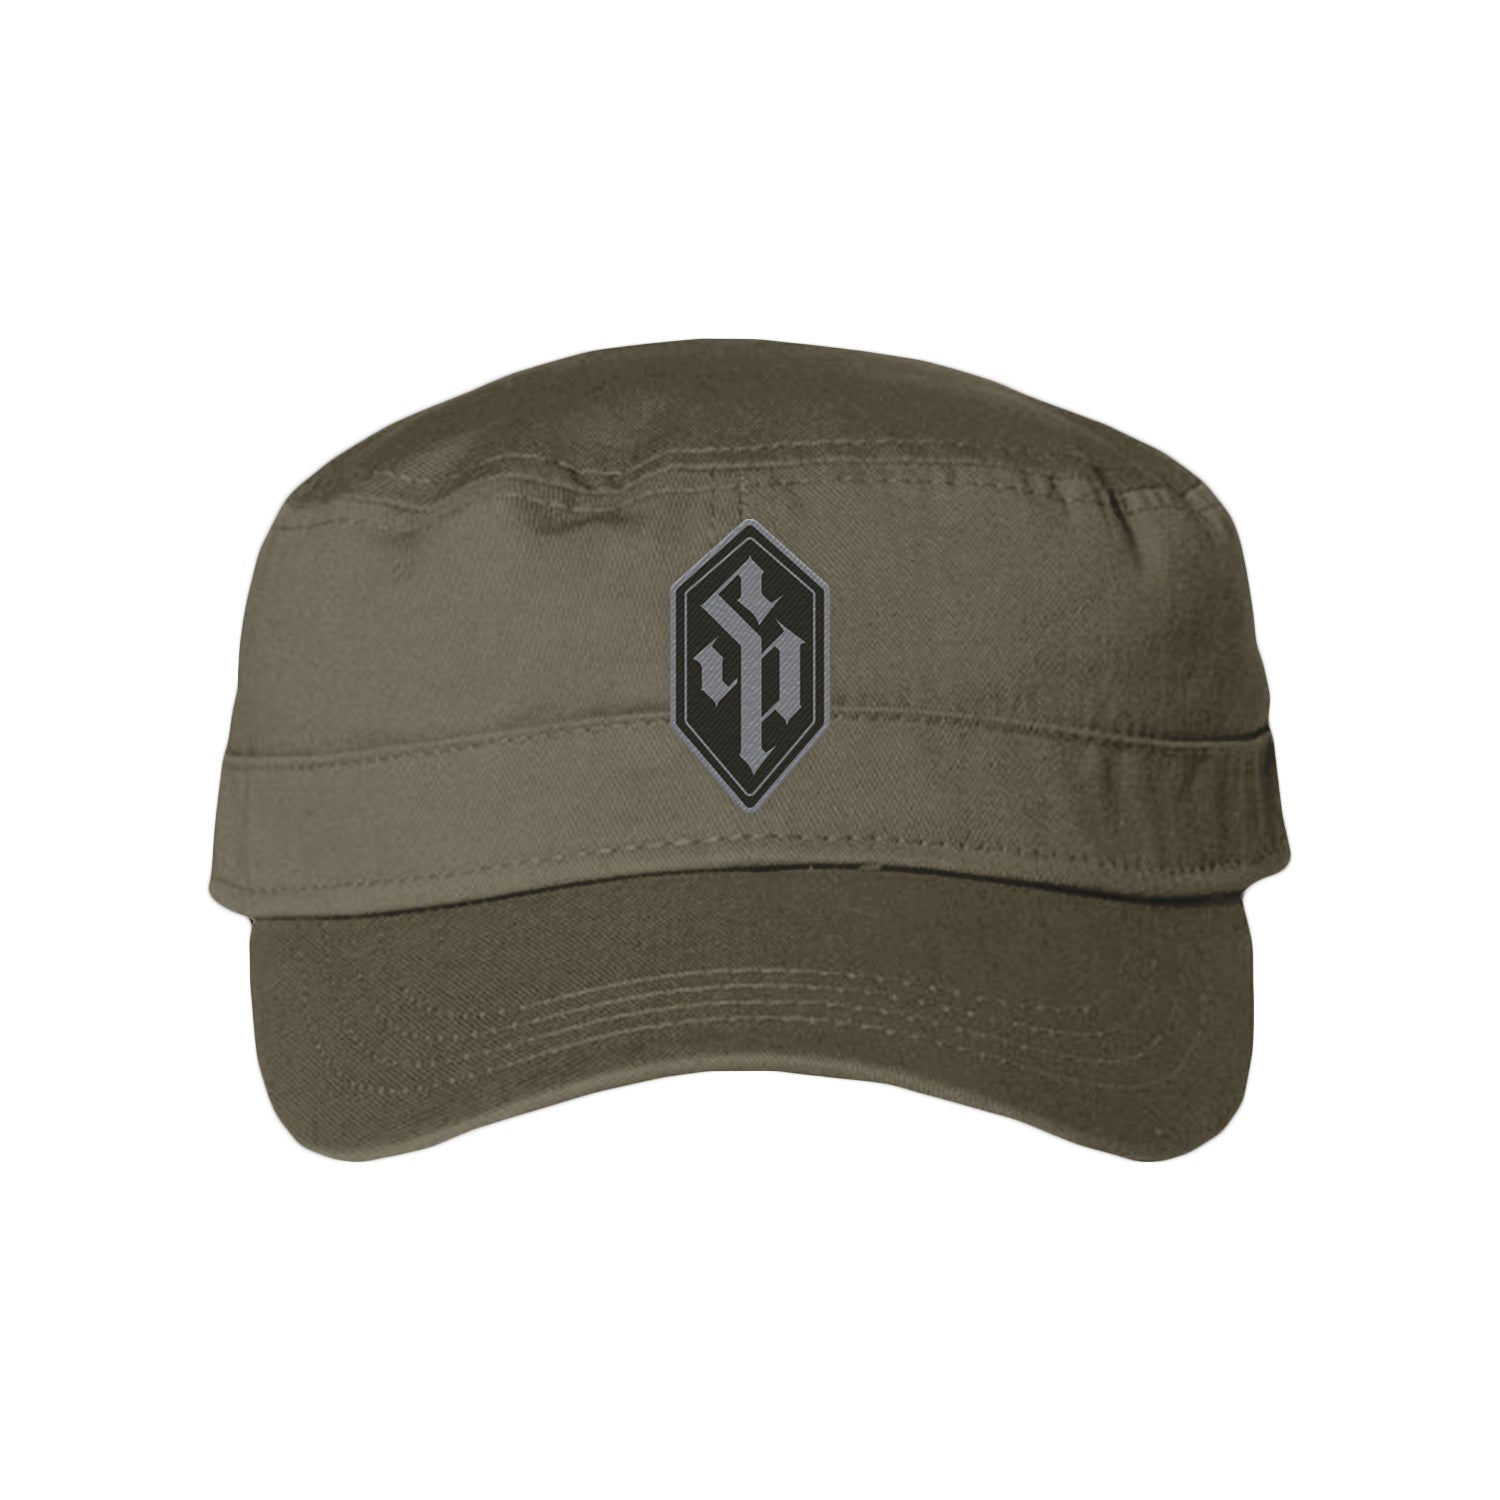 Olive green military style hat on a white background. The center of the hat features a black patch in a diamond shape that has the letters S and P in the center of the shape.